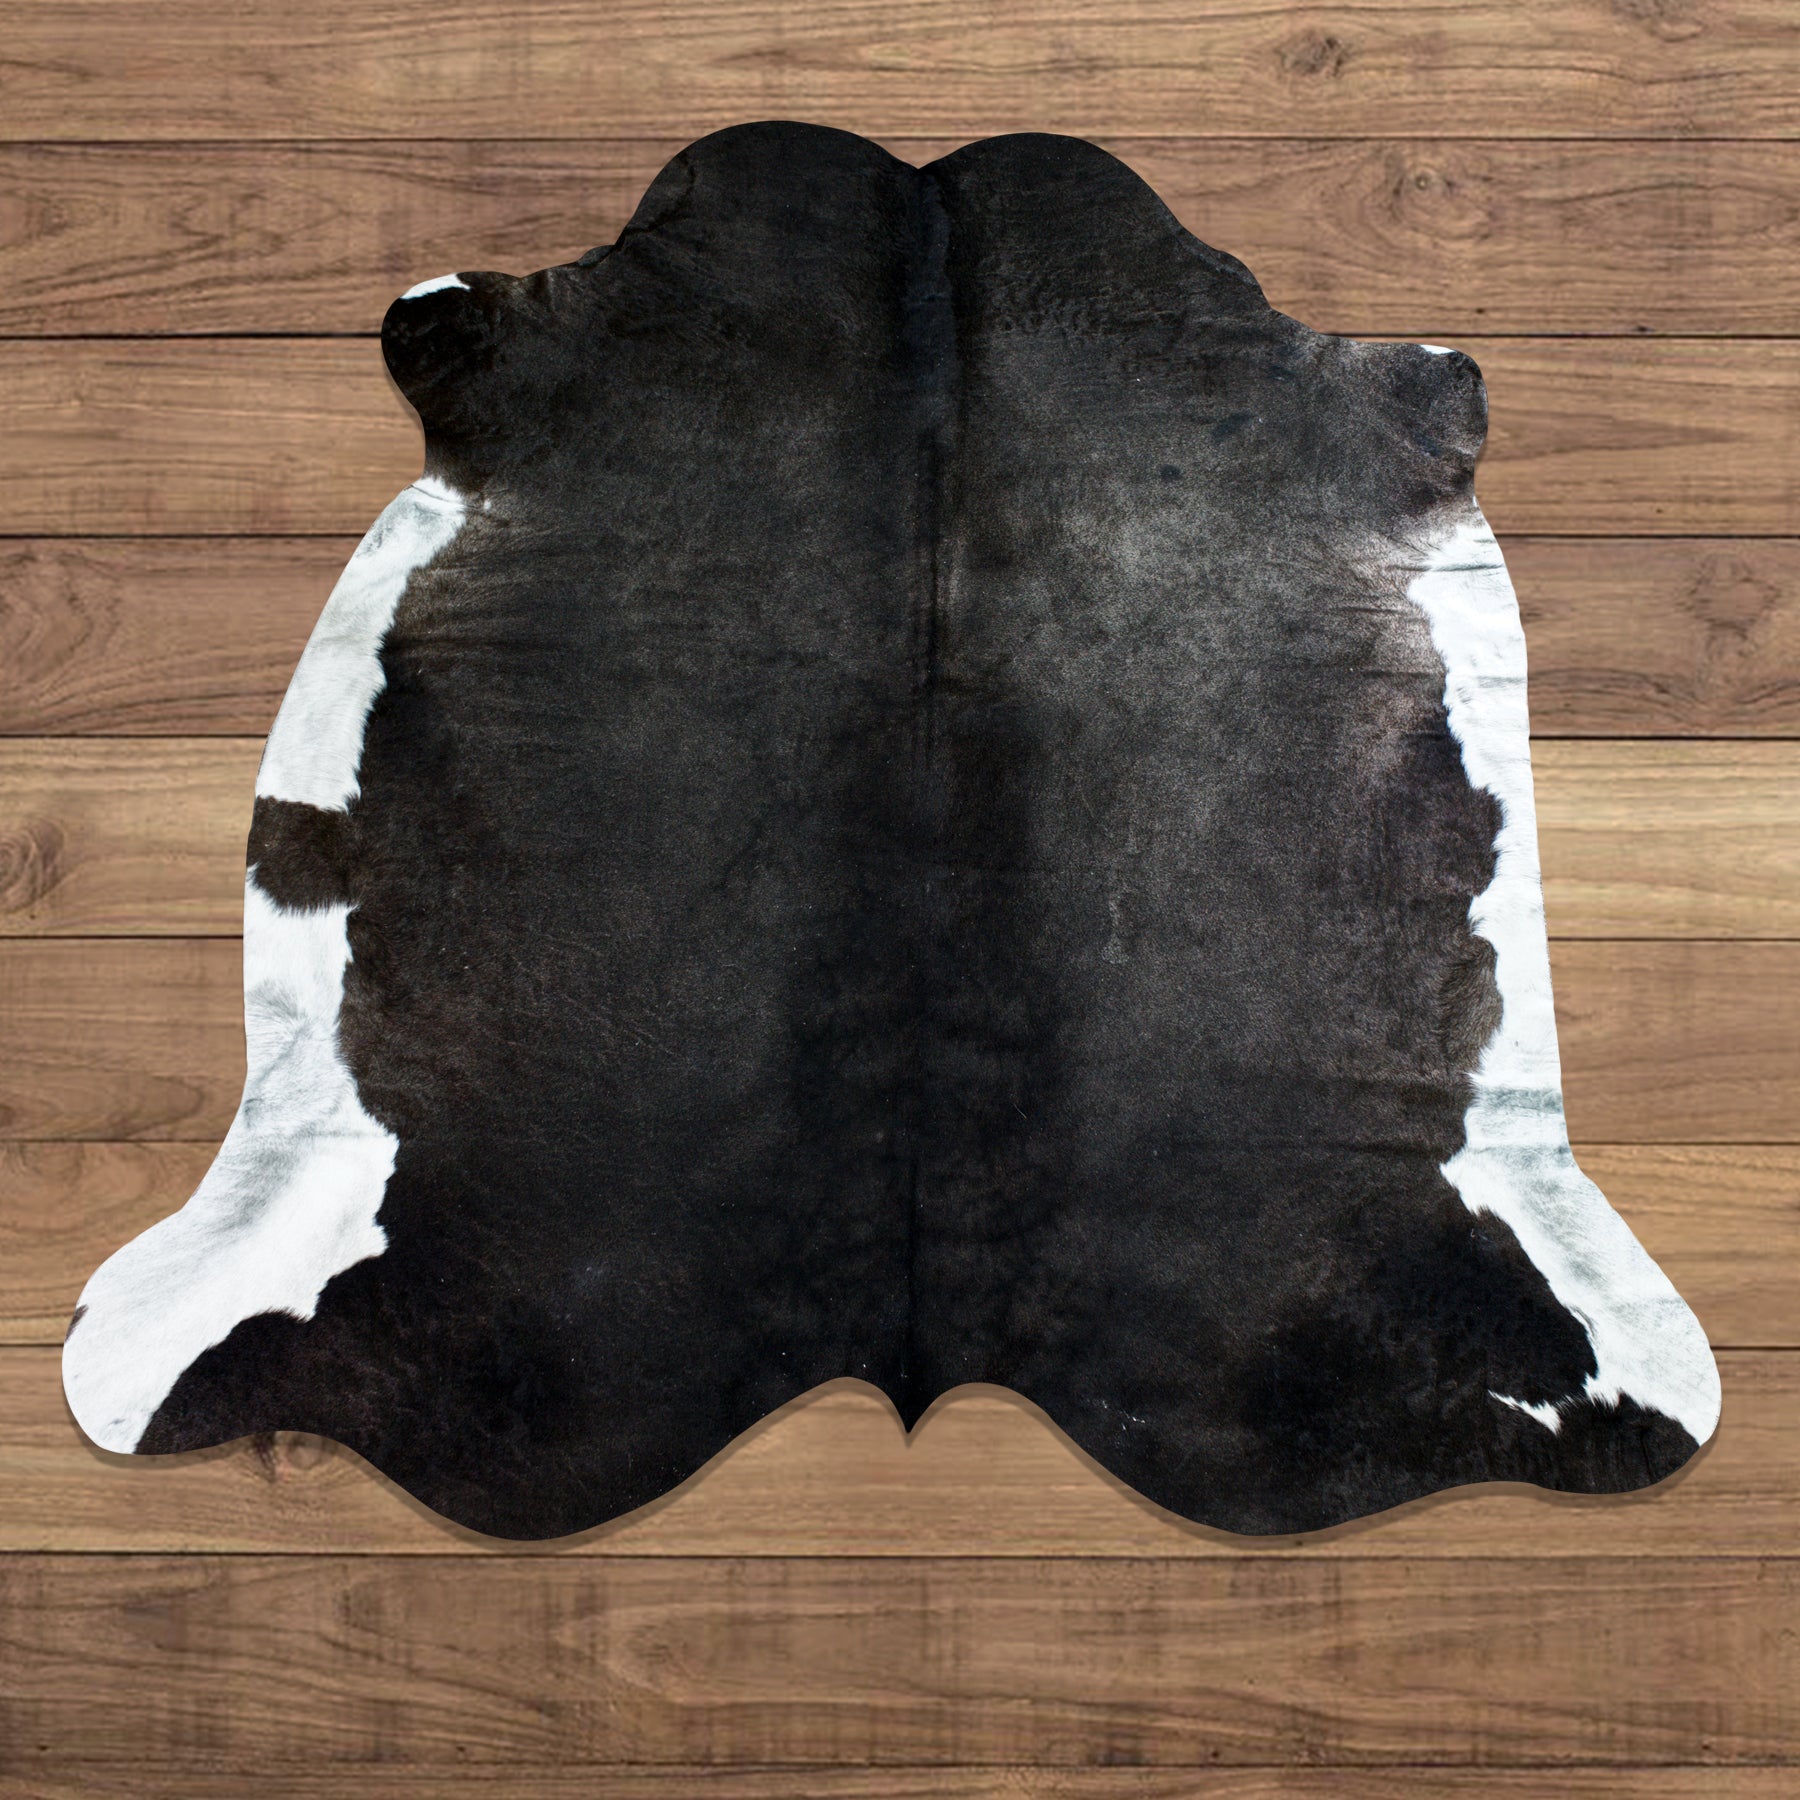 Extra Large RODEO exotic cowhide rug 6.9 x 7.7 ft-- -4292 - Rodeo Cowhide Rugs